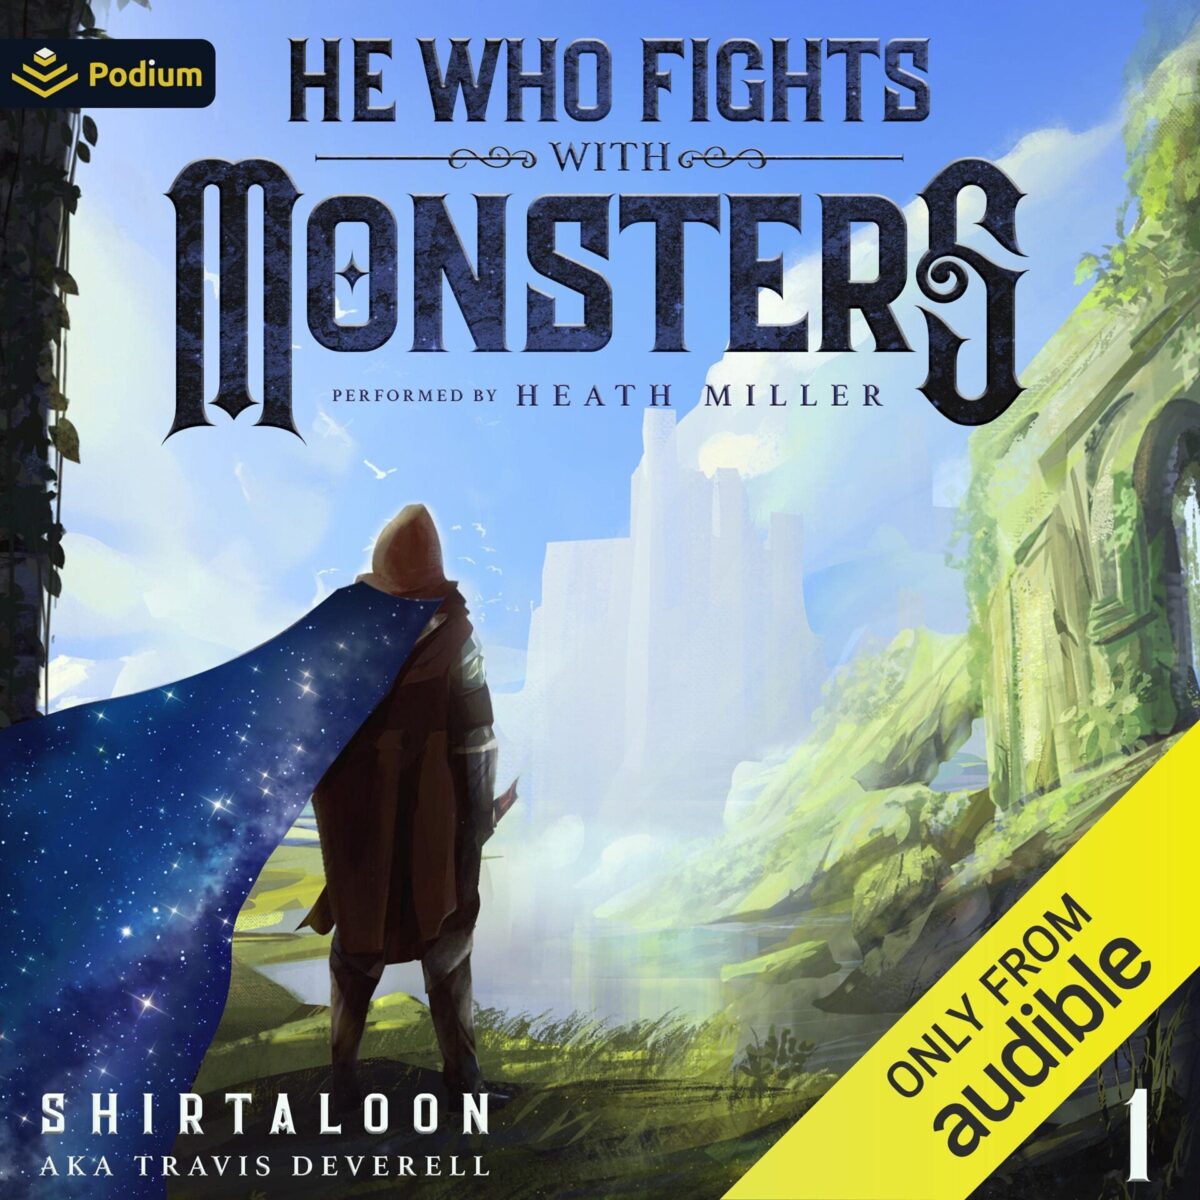 He Who Fights with Monsters – The Audiobook Review